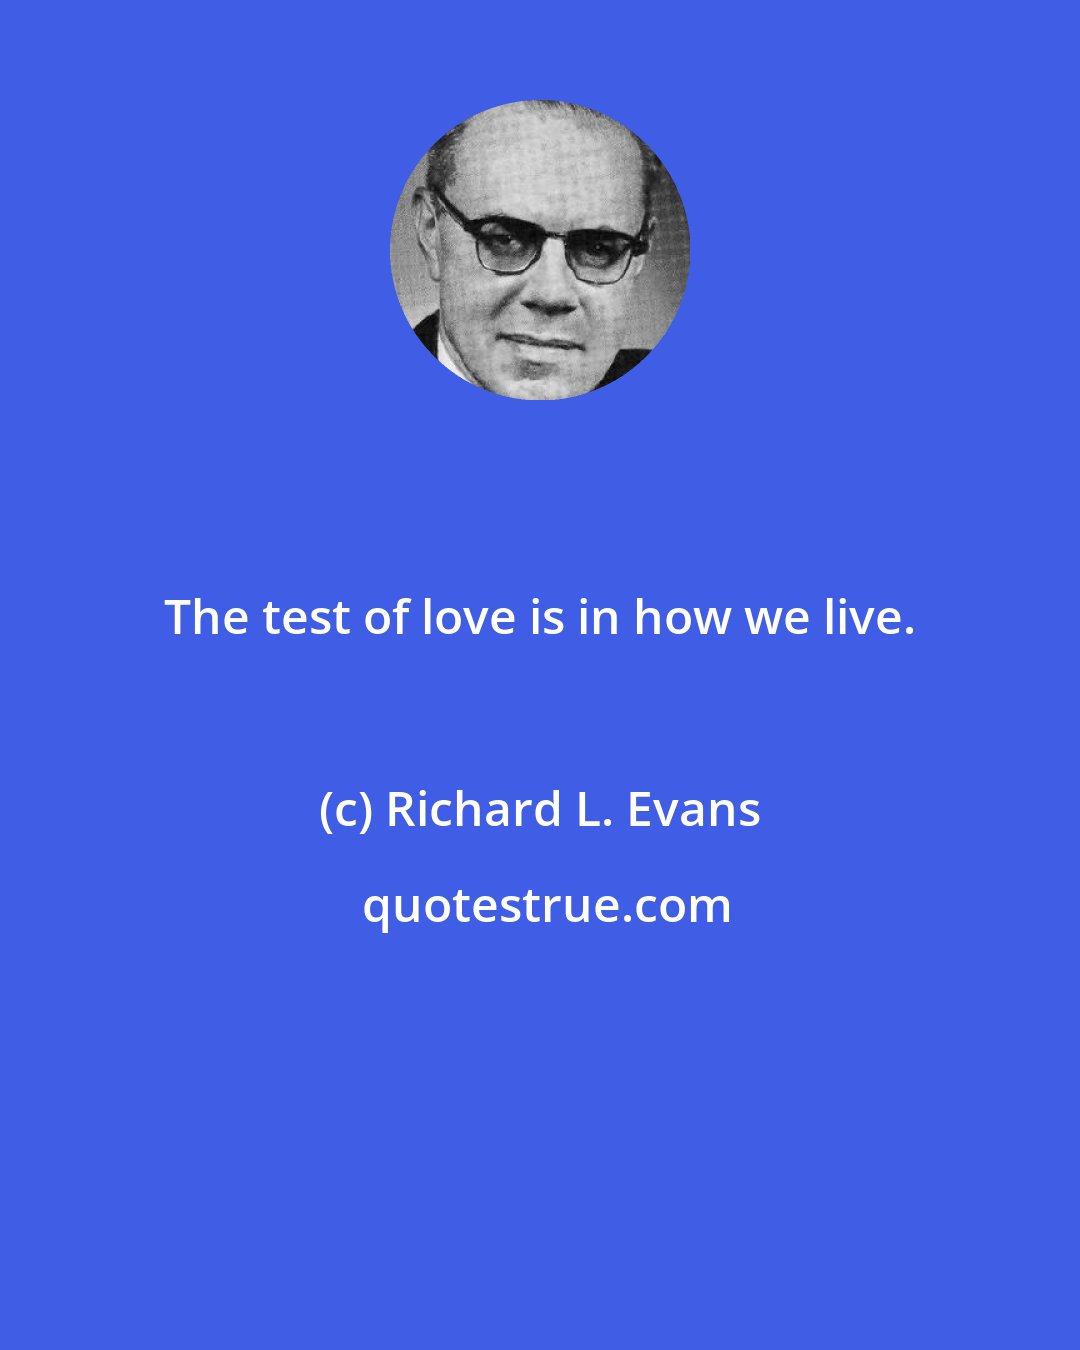 Richard L. Evans: The test of love is in how we live.